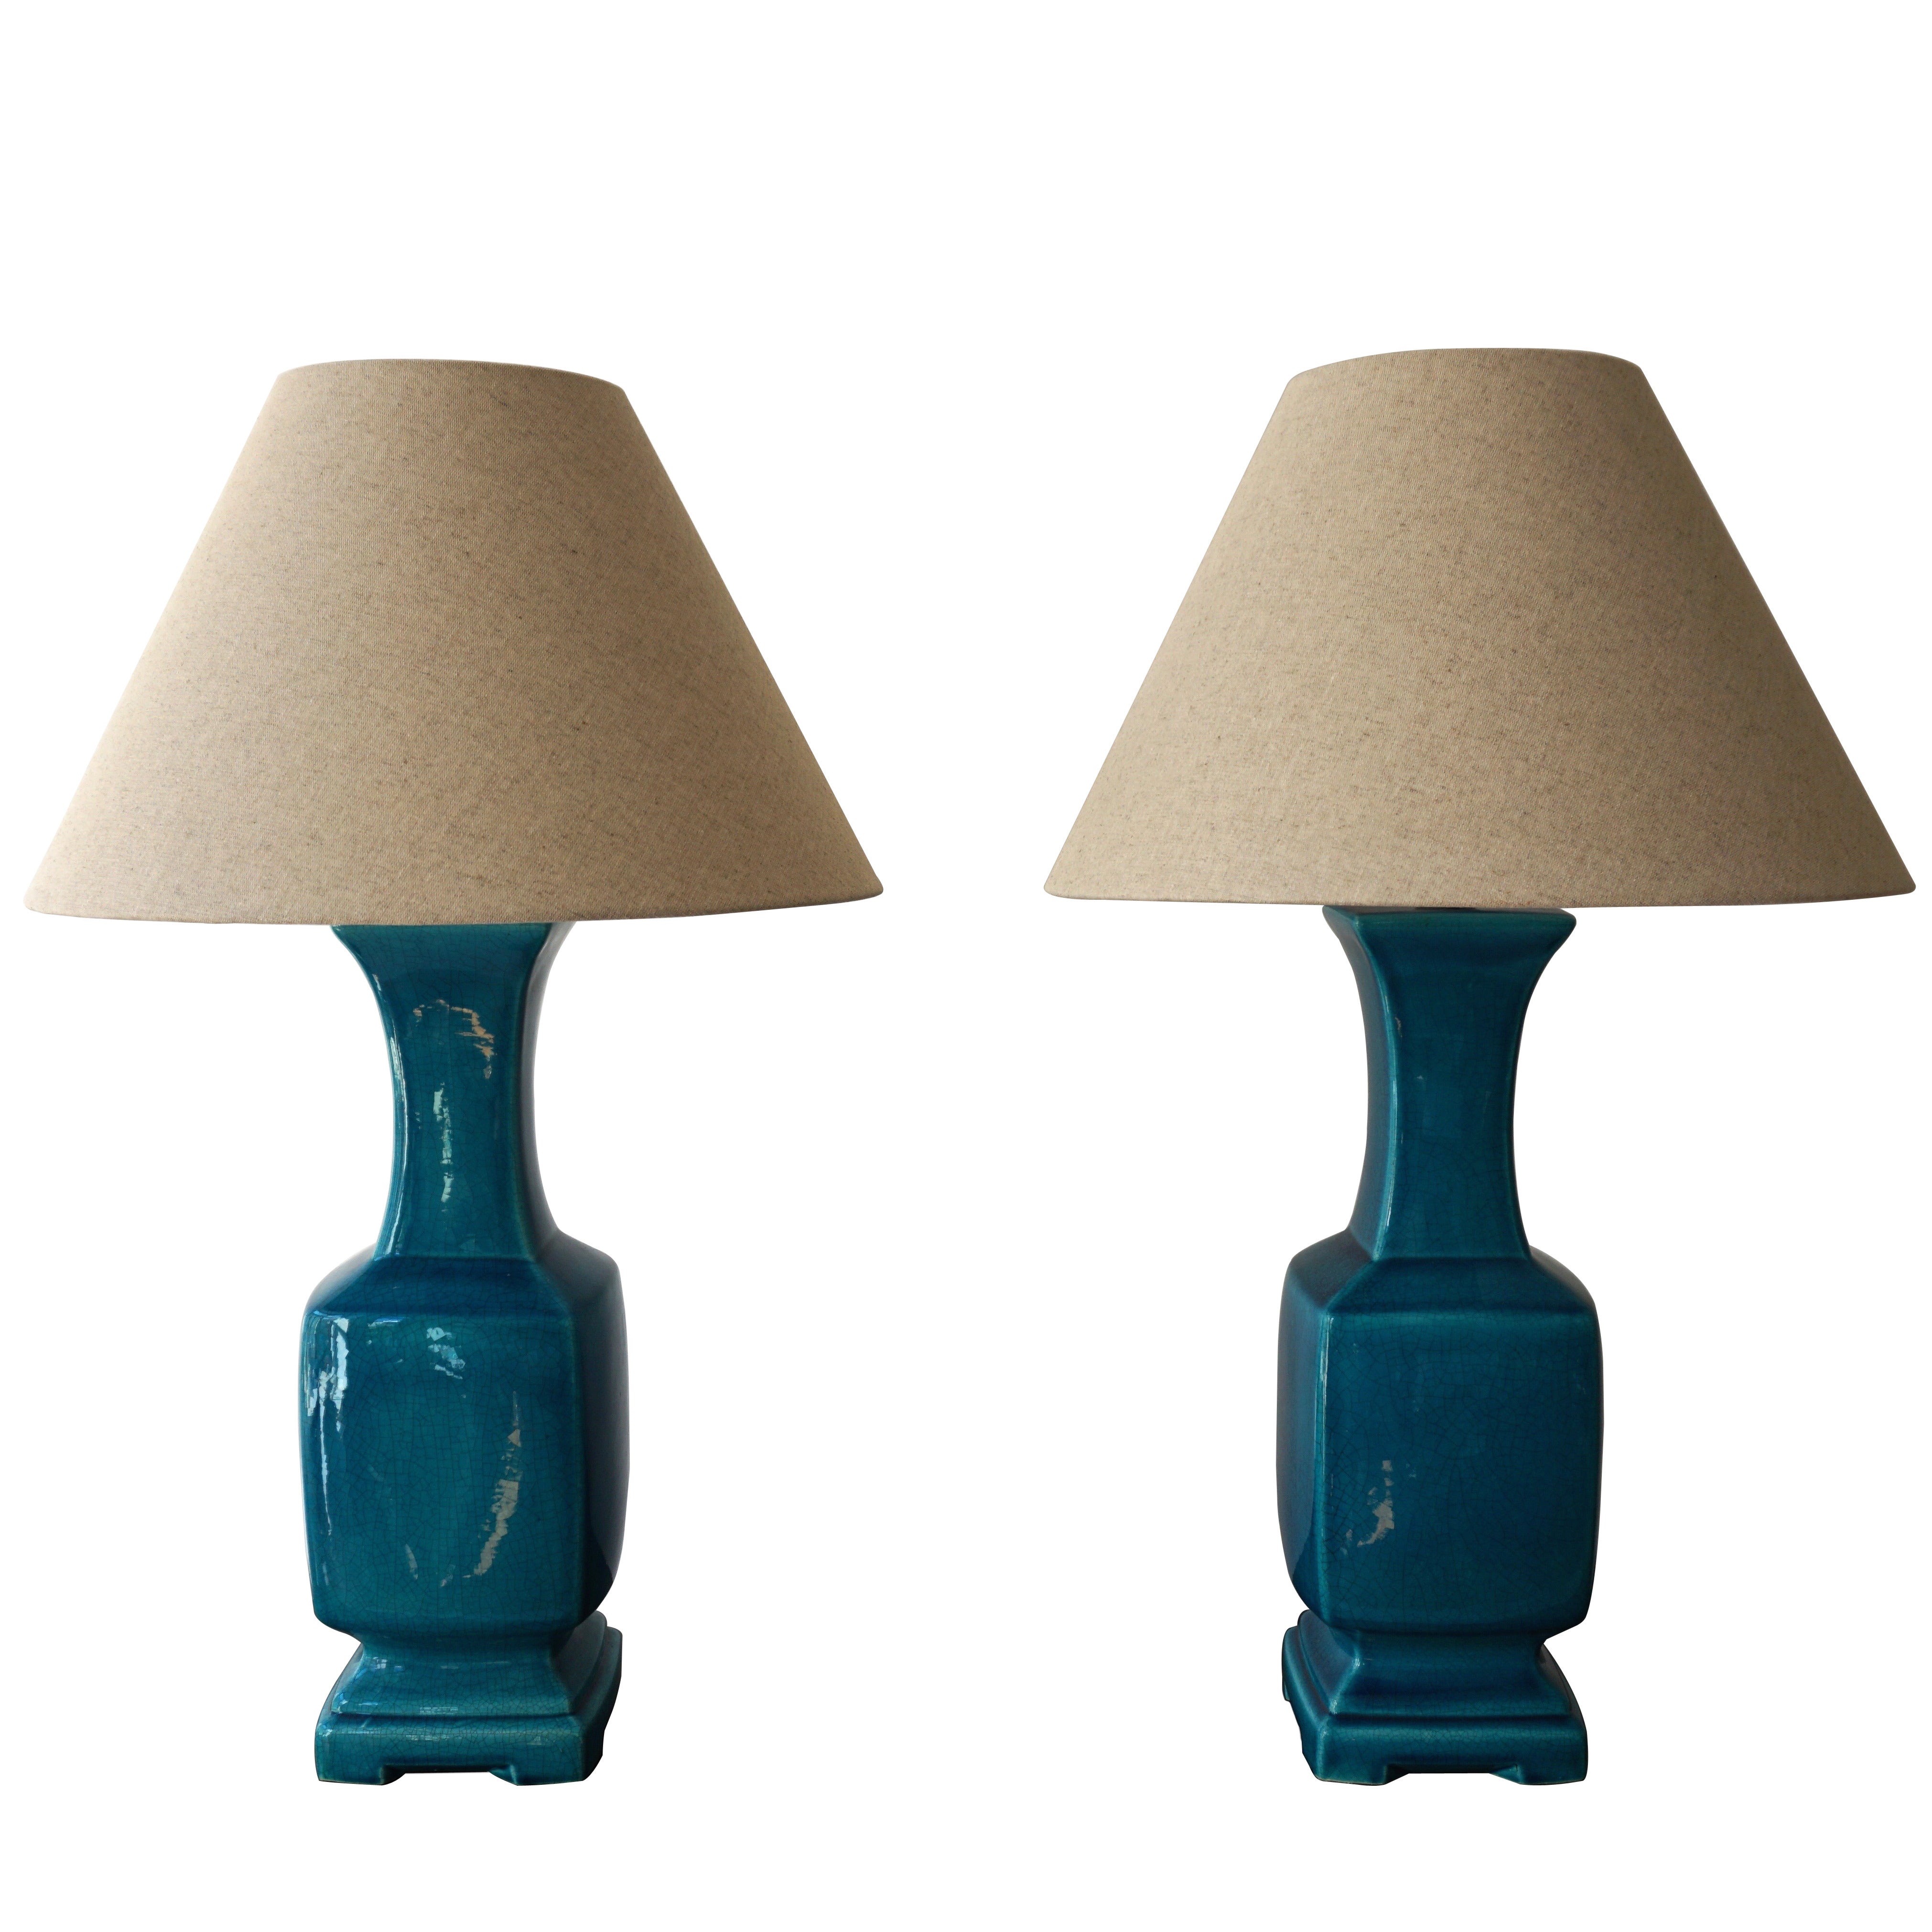 Charming Pair of Table Lights in the Manner of Bitossi